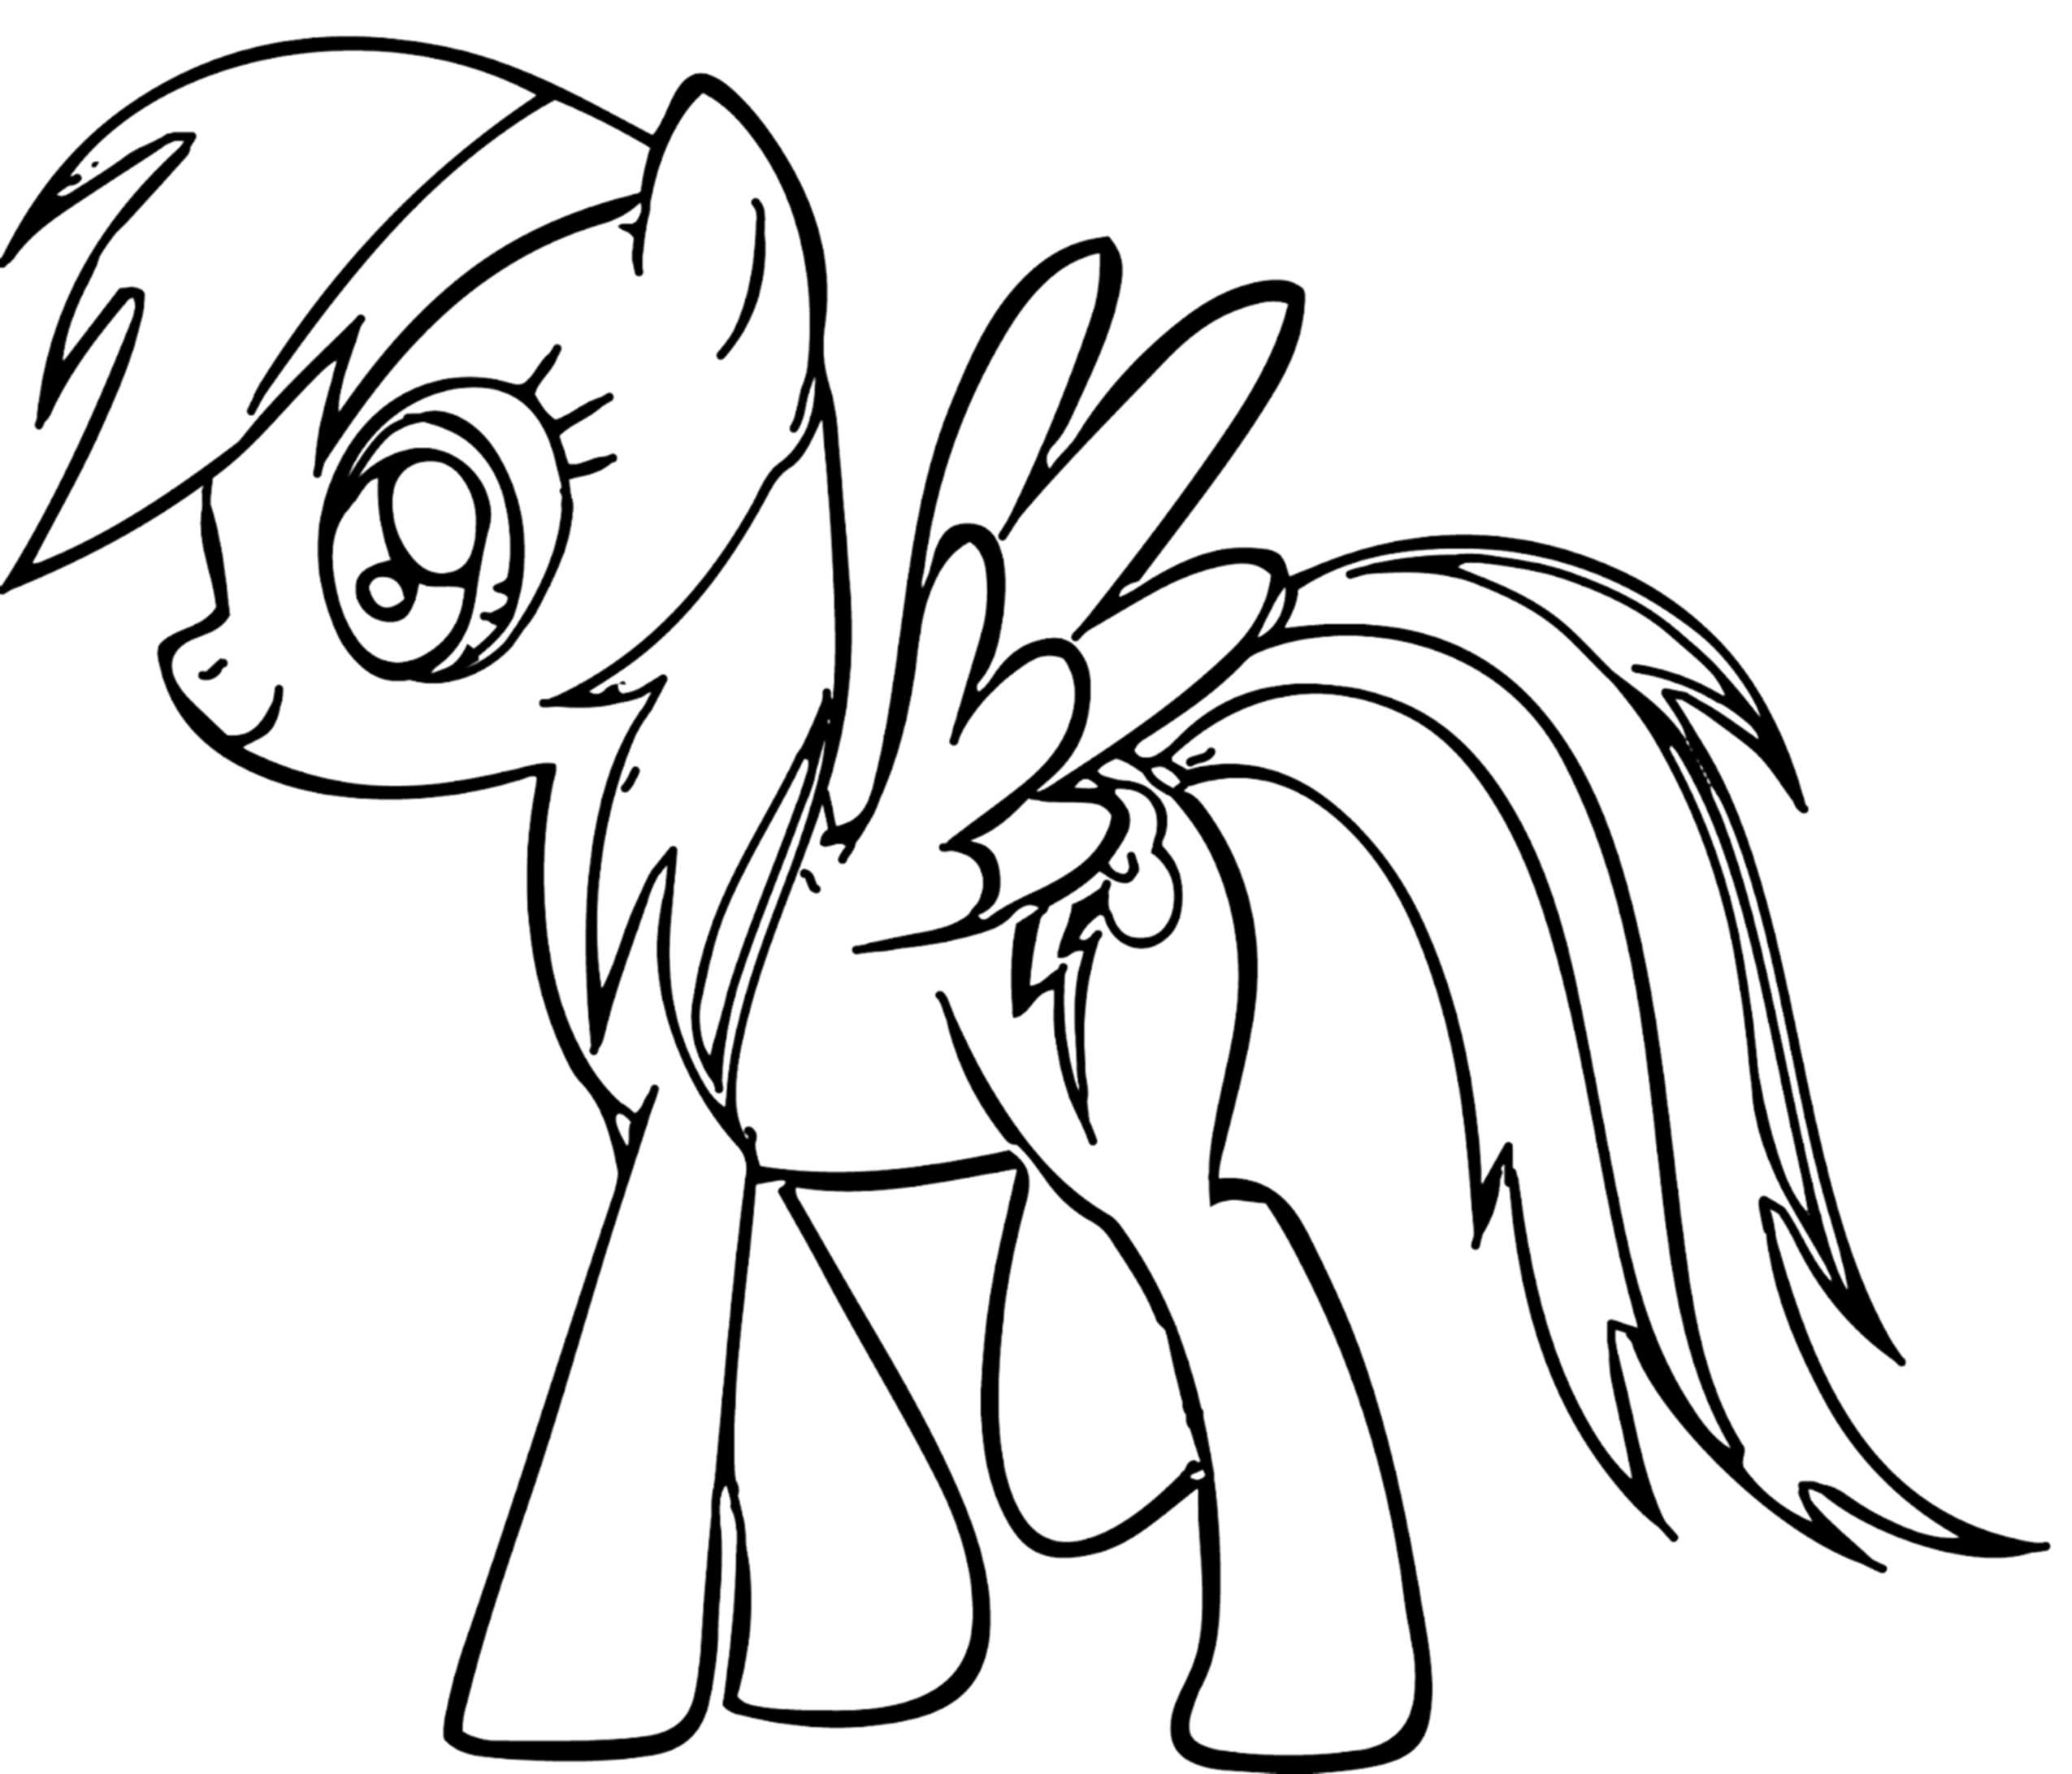 Download Rainbow Dash Coloring Pages Best Coloring Pages For Kids